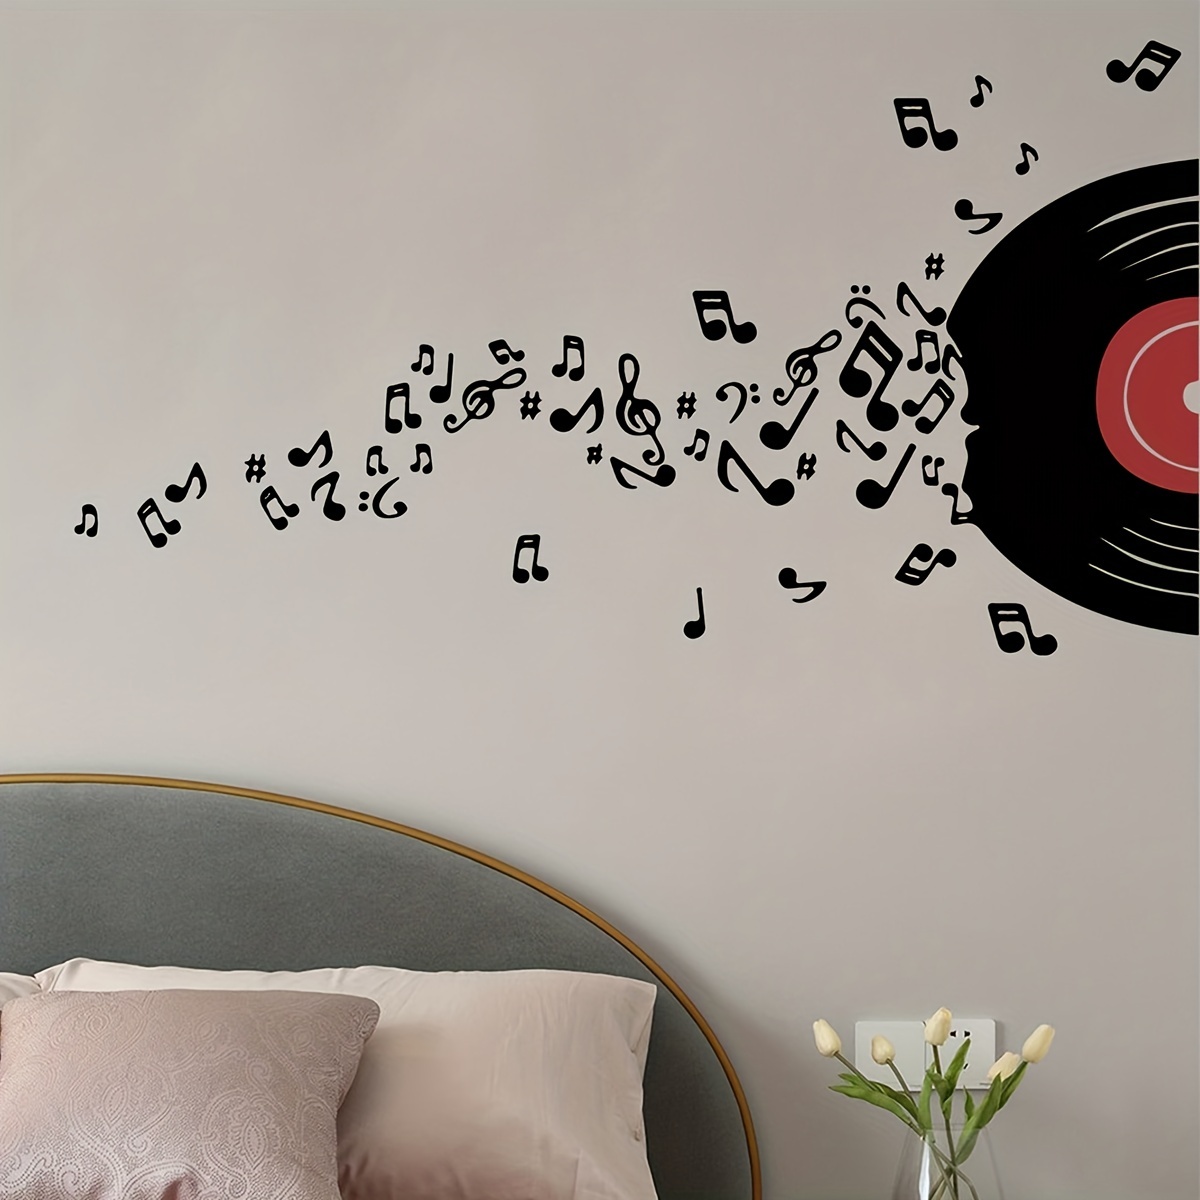  4pcs Vinyl Record Wall Sticker Music Notes Wall Decals